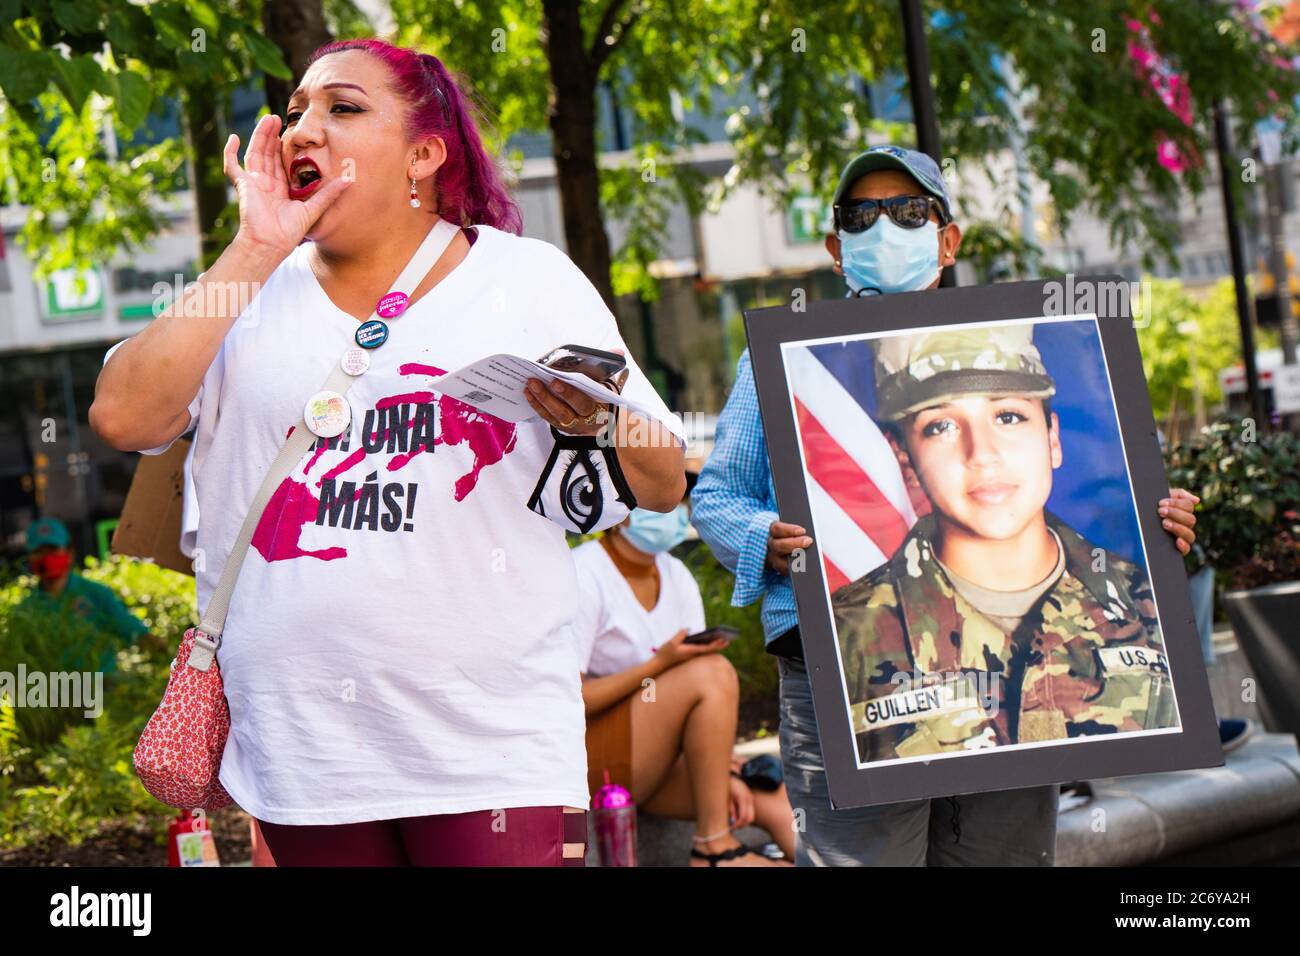 Philadelphia / USA. A woman calls out to a crowd standing in front of an enlarged photgraph of slain US service member Vanessa Guillen at a protest organized by Philadephia Latinx organizatoin, Juntos.  July 12, 2020. Credit: Christopher Evens / Alamy Live News Stock Photo